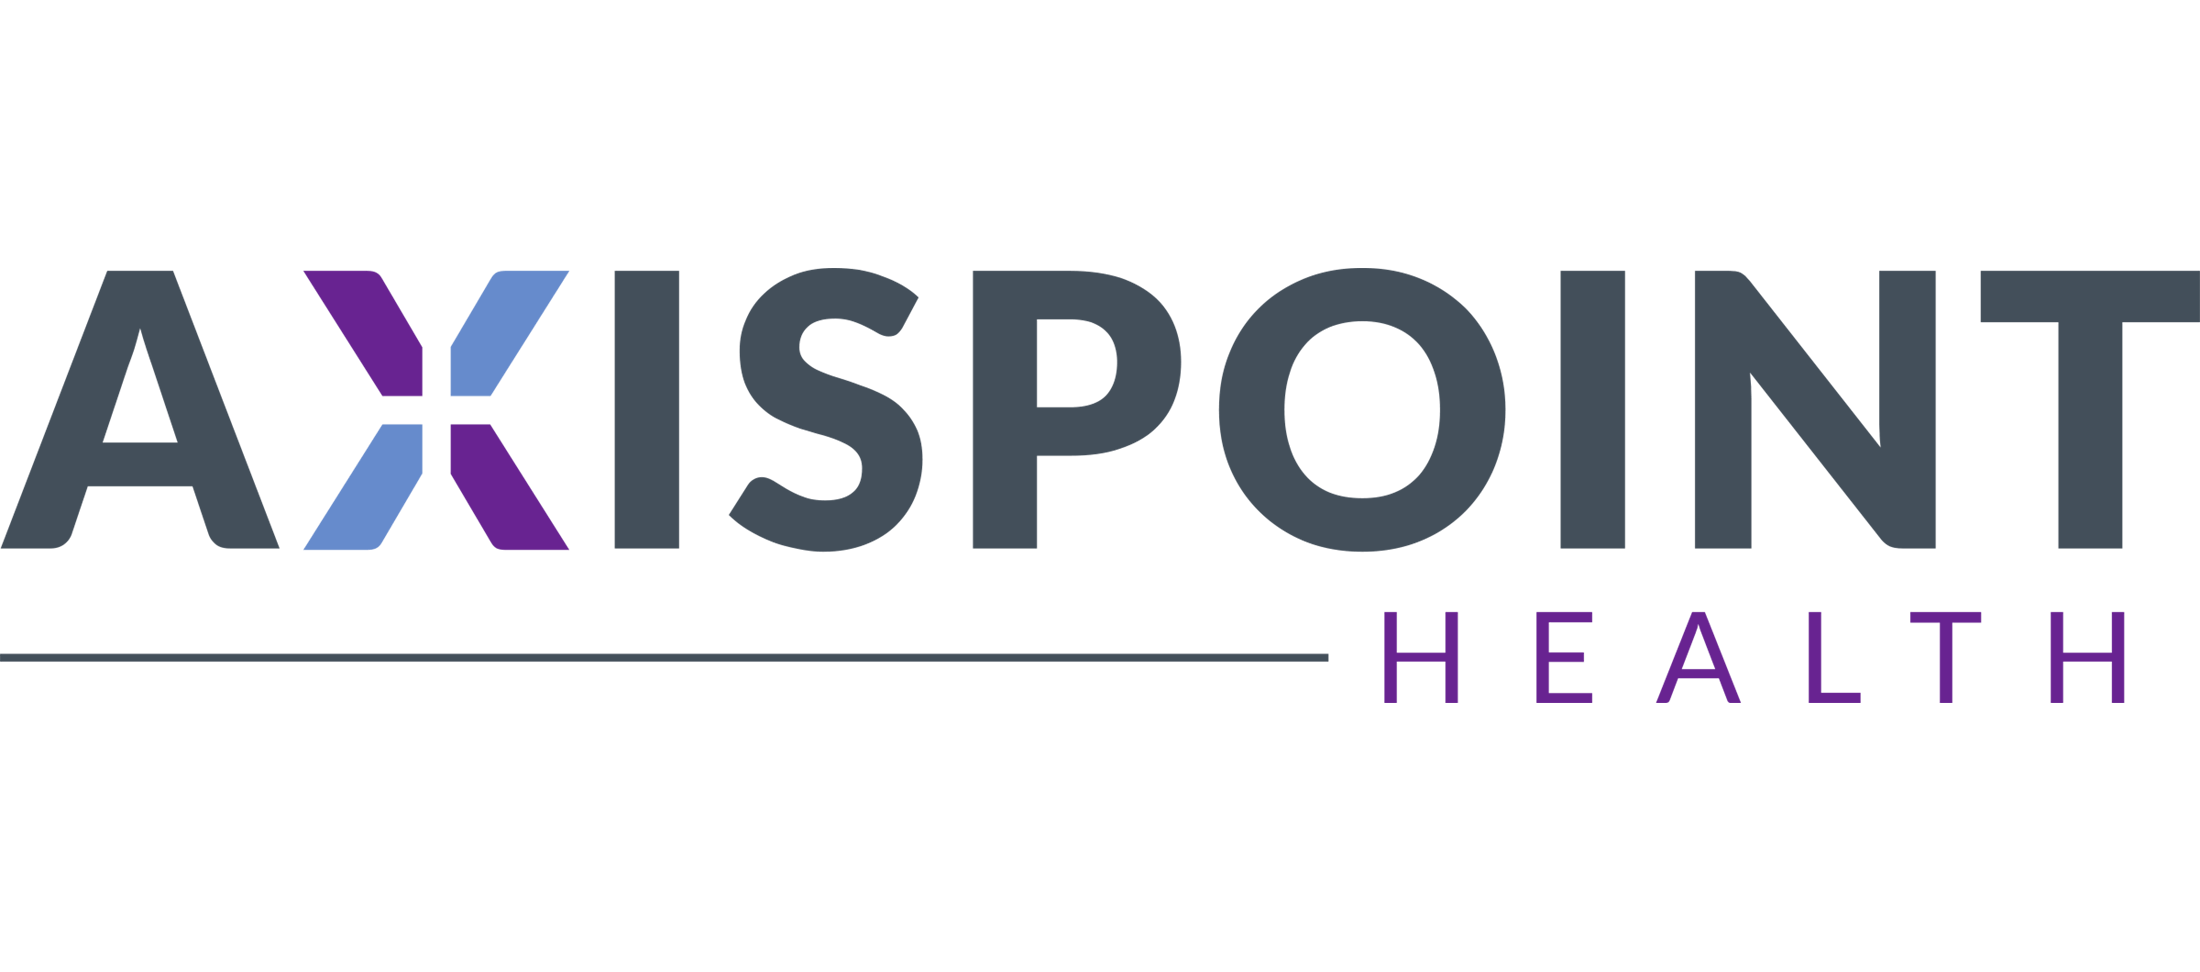 AxisPoint Health Taps mPulse Mobile for Engagement Tools to Further Activate Health Plan Members in Their Care